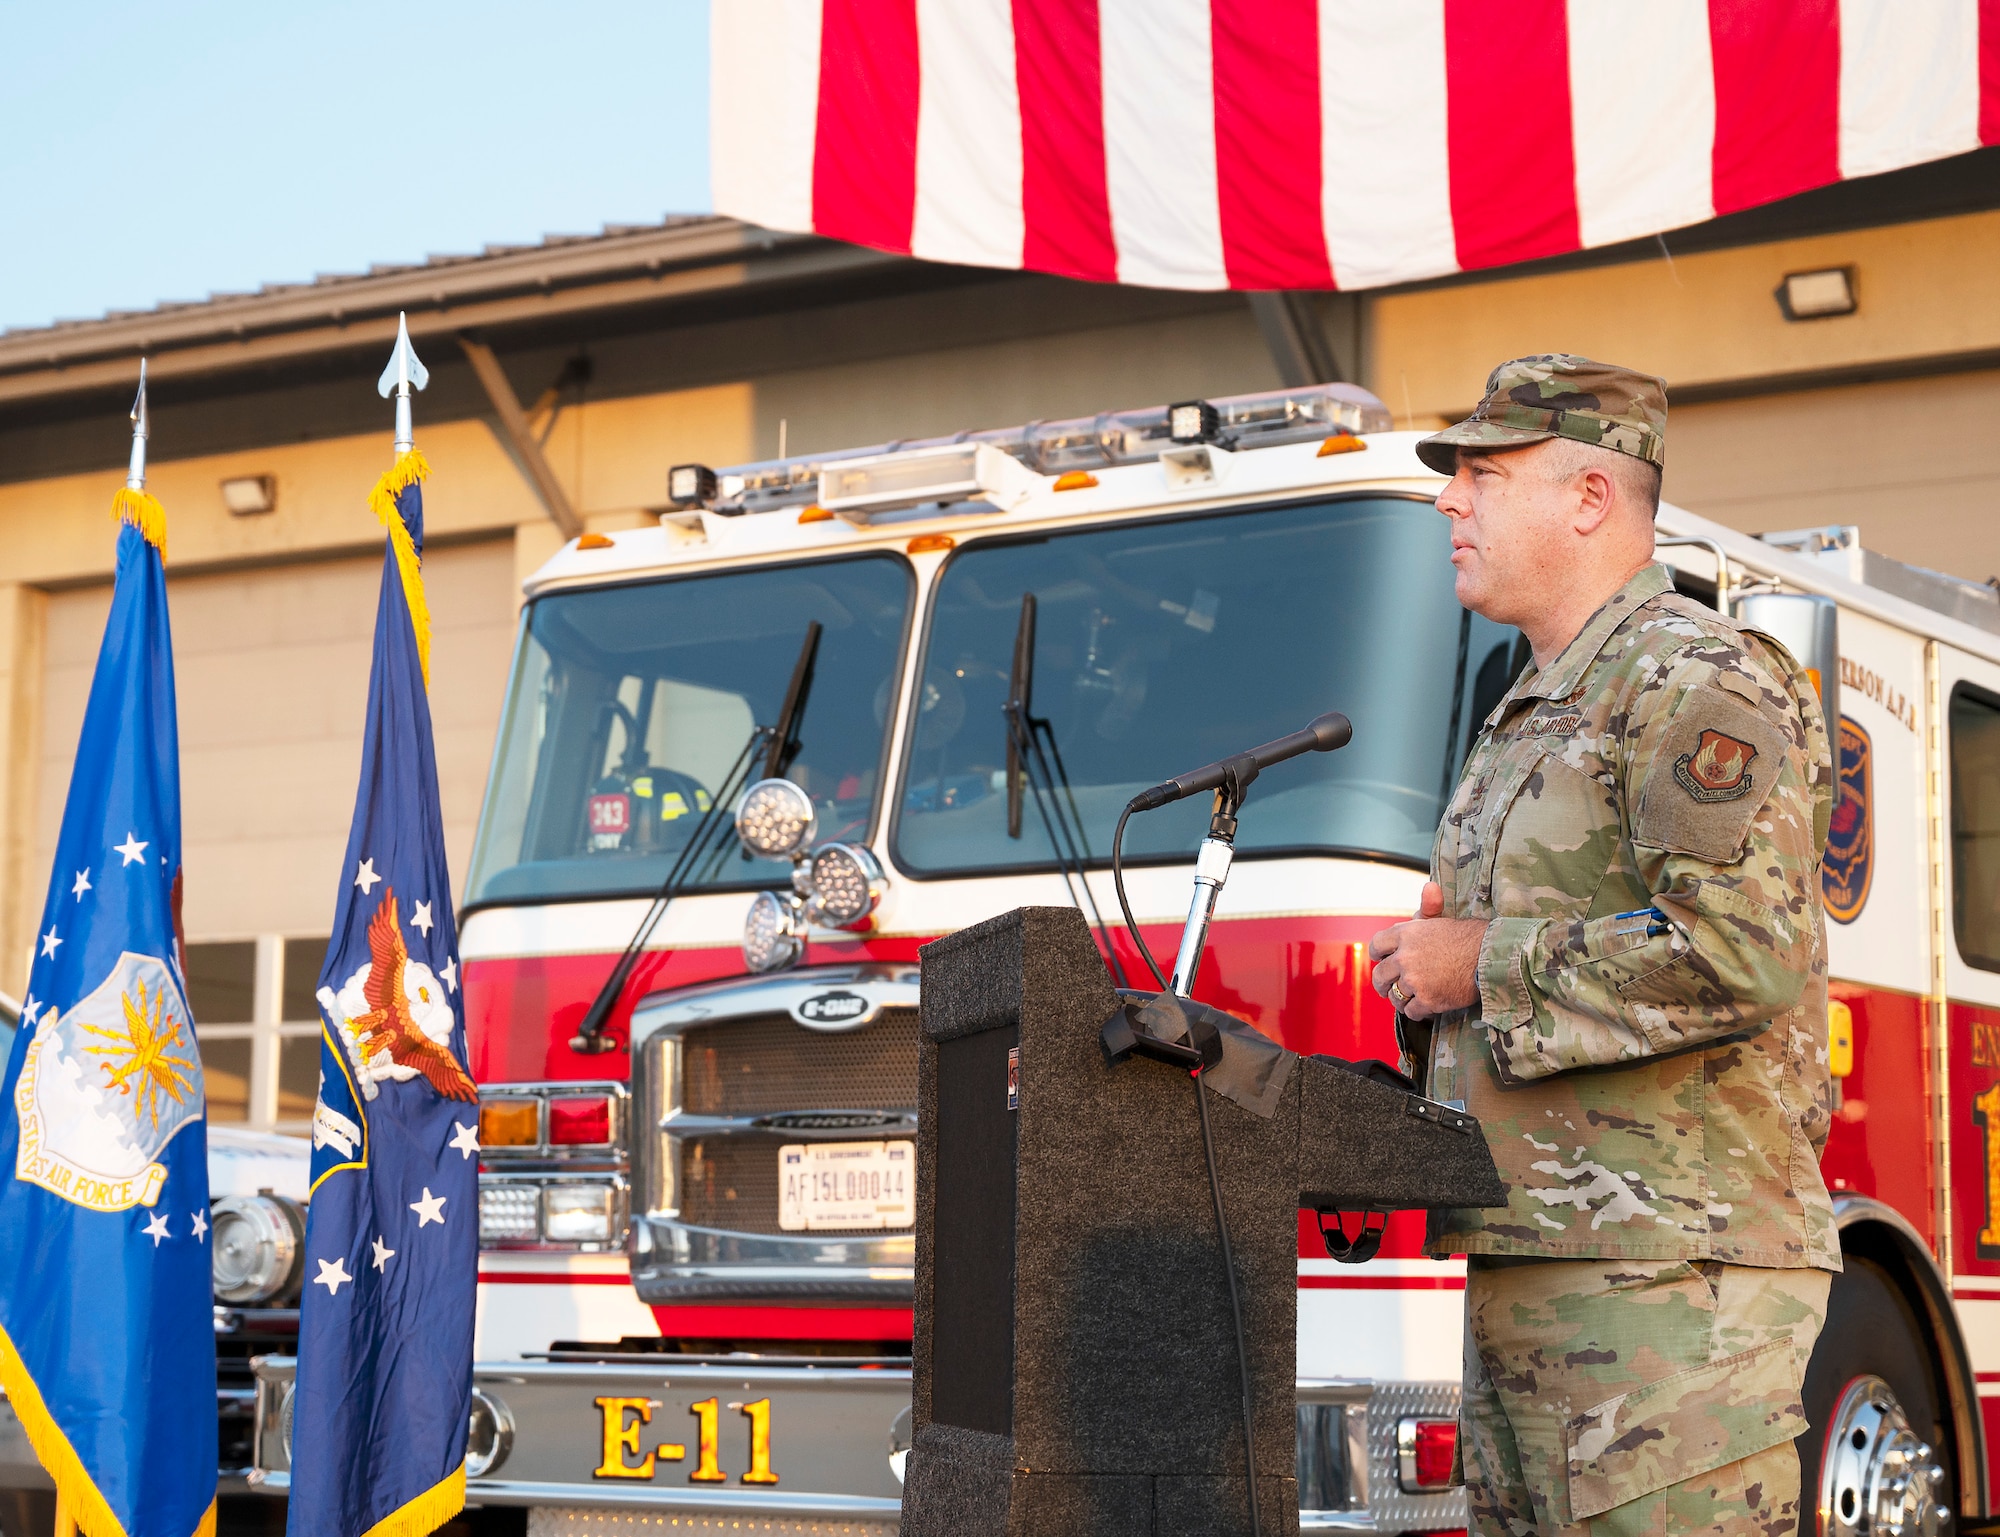 Col. Patrick Miller, 88th Air Base Wing and installation commander, delivers remarks during the 9/11 commemoration ceremony Sept. 10, 2021, in front of the main firehouse  at Wright-Patterson Air Force Base, Ohio. Miller praised heroics of the first responders that day and how they continue to inspire. (U.S. Air Force photo by R.J. Oriez)